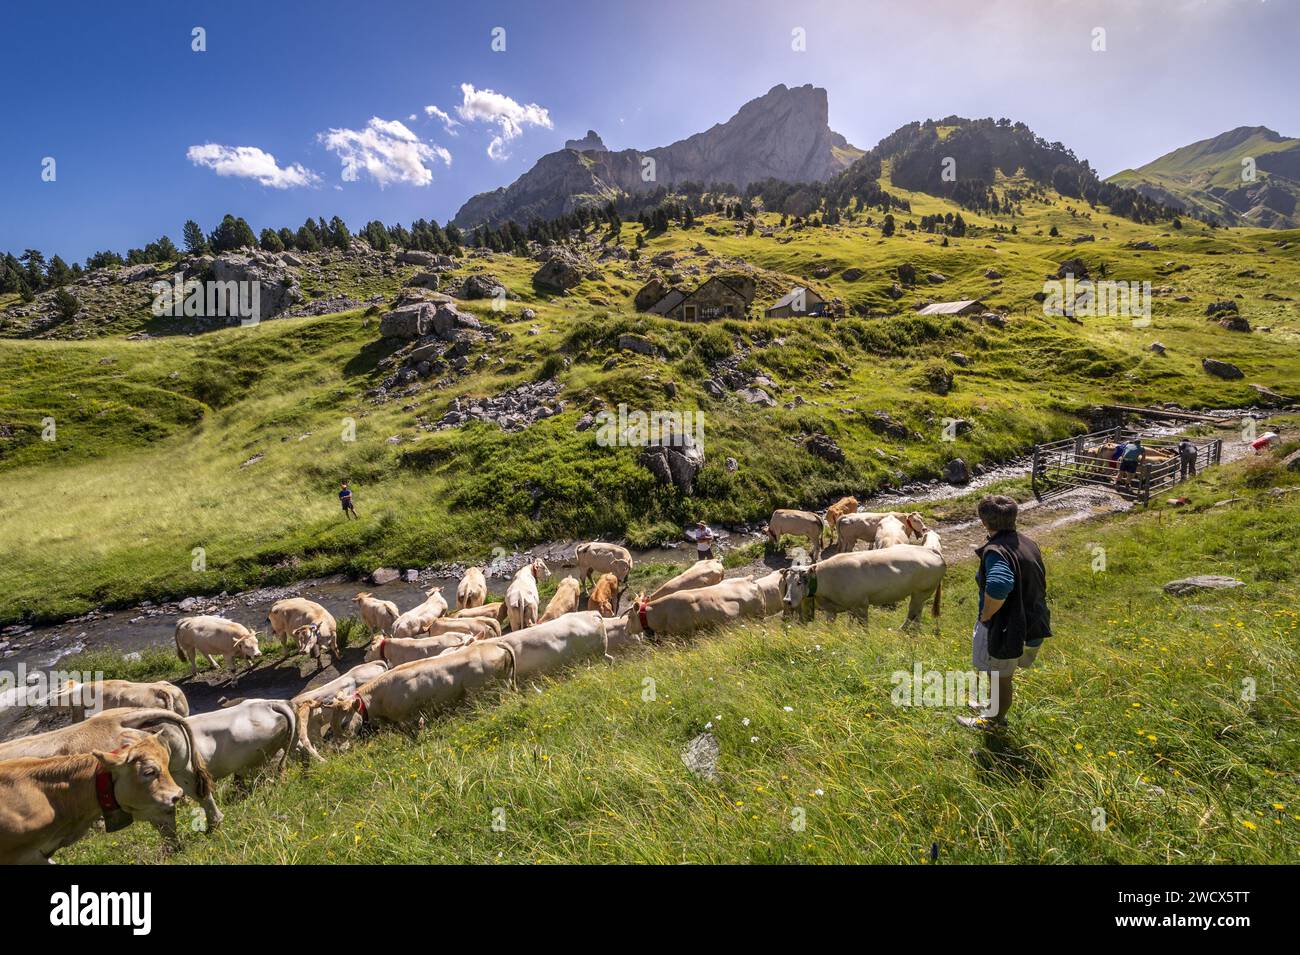 France, Pyrenees Atlantiques, Béarn, Ossau valley, Pyrenees National Park, herd of cows arriving at the summer pastures and waiting for the shepherds to remove their transhumance bells, the Pic du Midi d'Ossau in the background Stock Photo